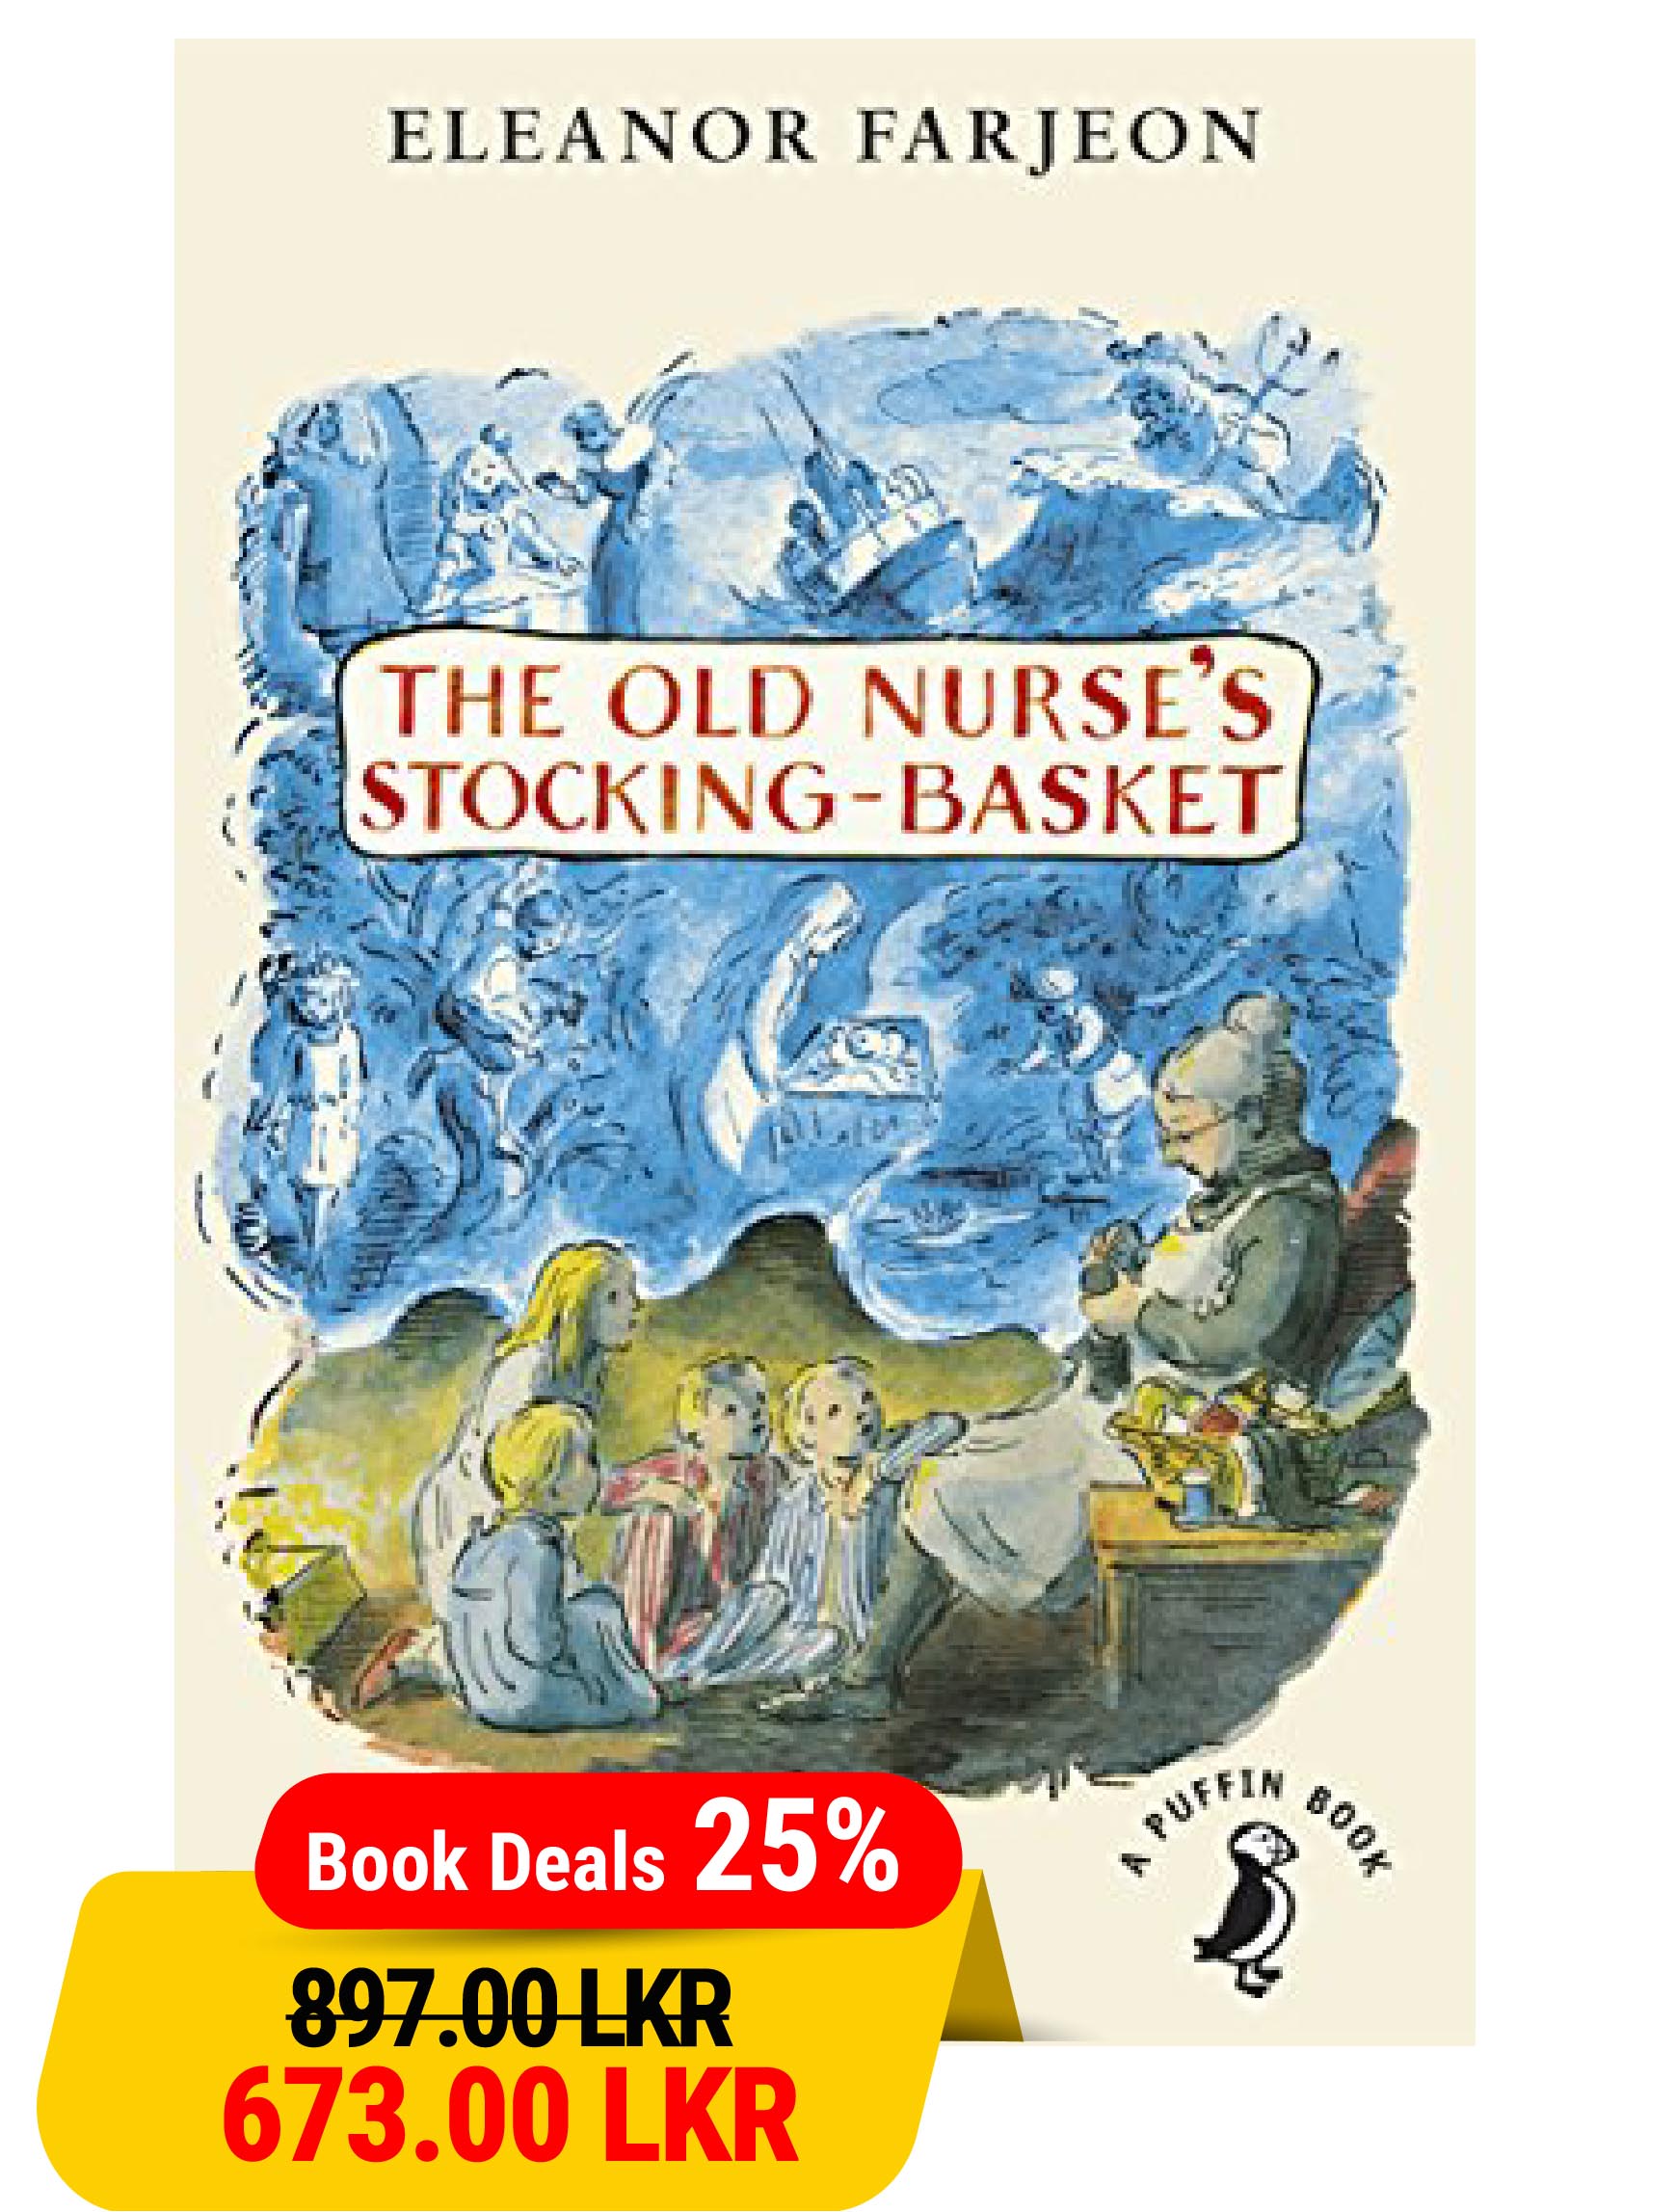 The Old Nurse?s Stocking-Basket (A Puffin Book)